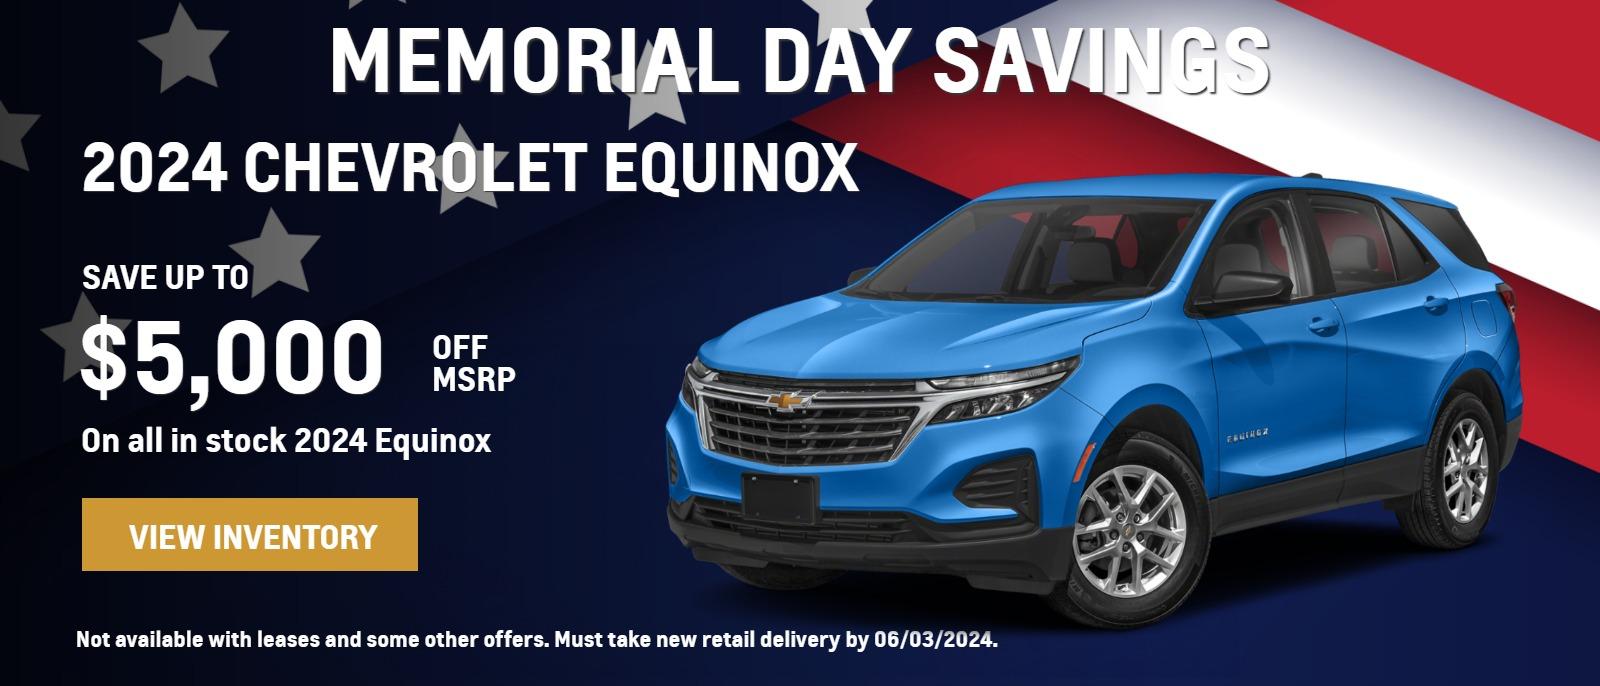 MEMORIAL DAY SAVINGS 2024 Equinox. SAVE UP TO $5,000 OFF MSRP On all in stock Equinox. Not available with leases and some other offers. Must take new retail delivery by 06/03/2024.